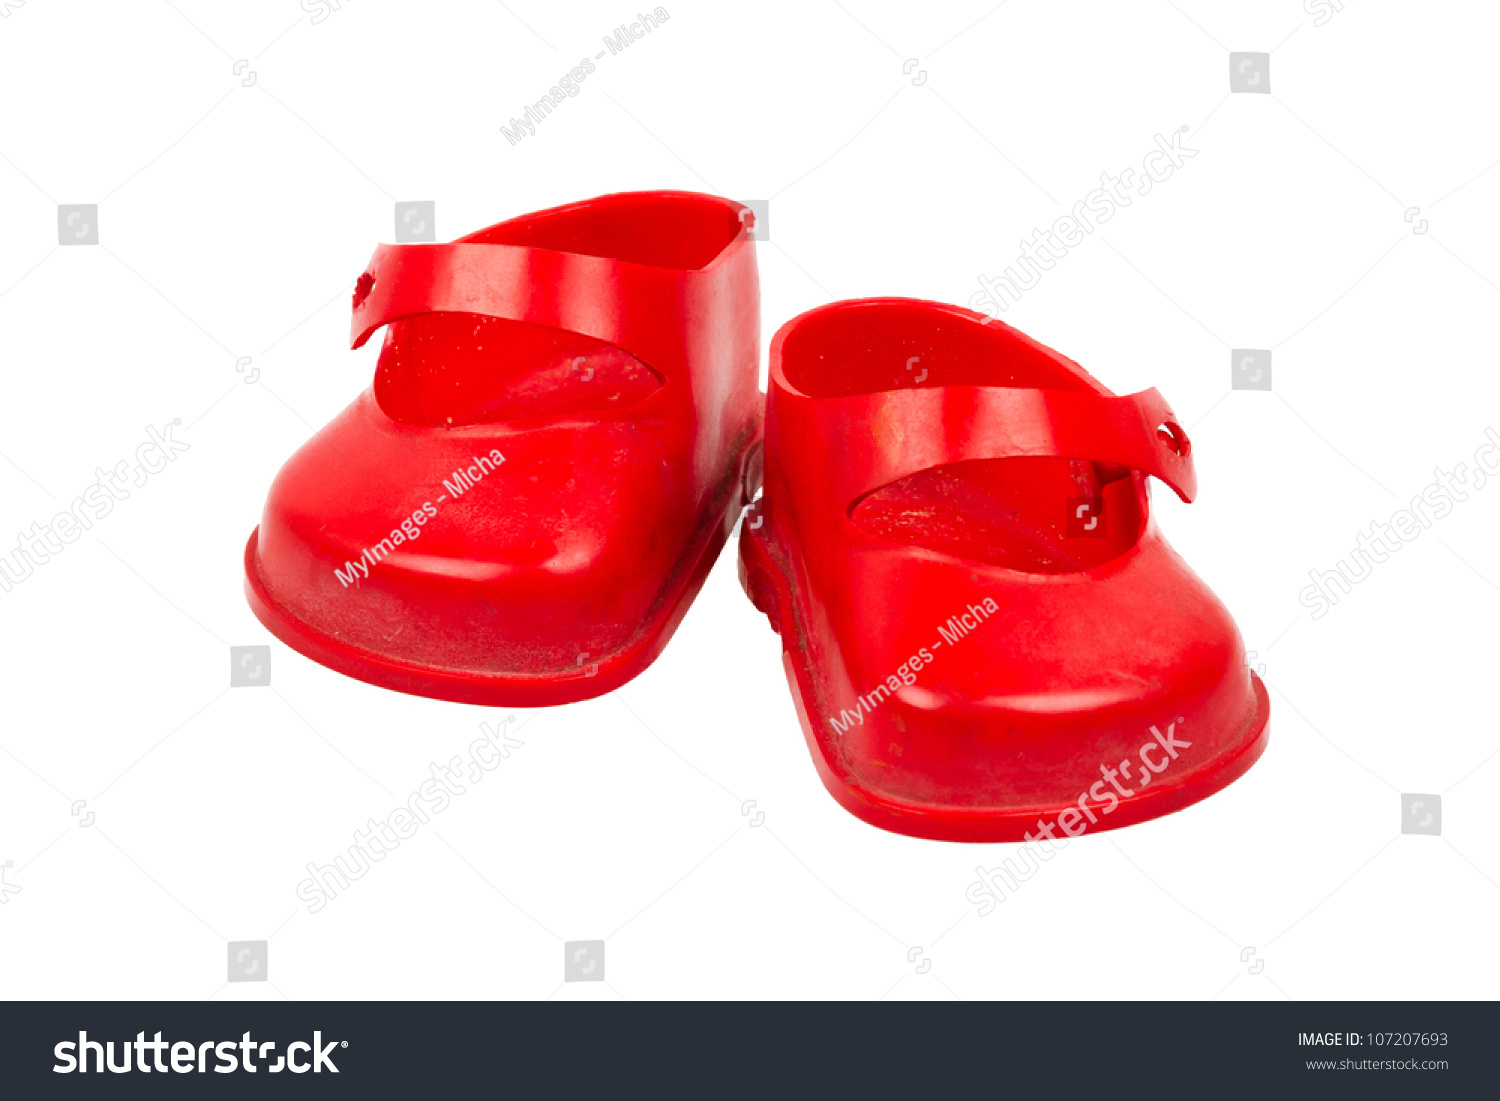 red baby doll shoes